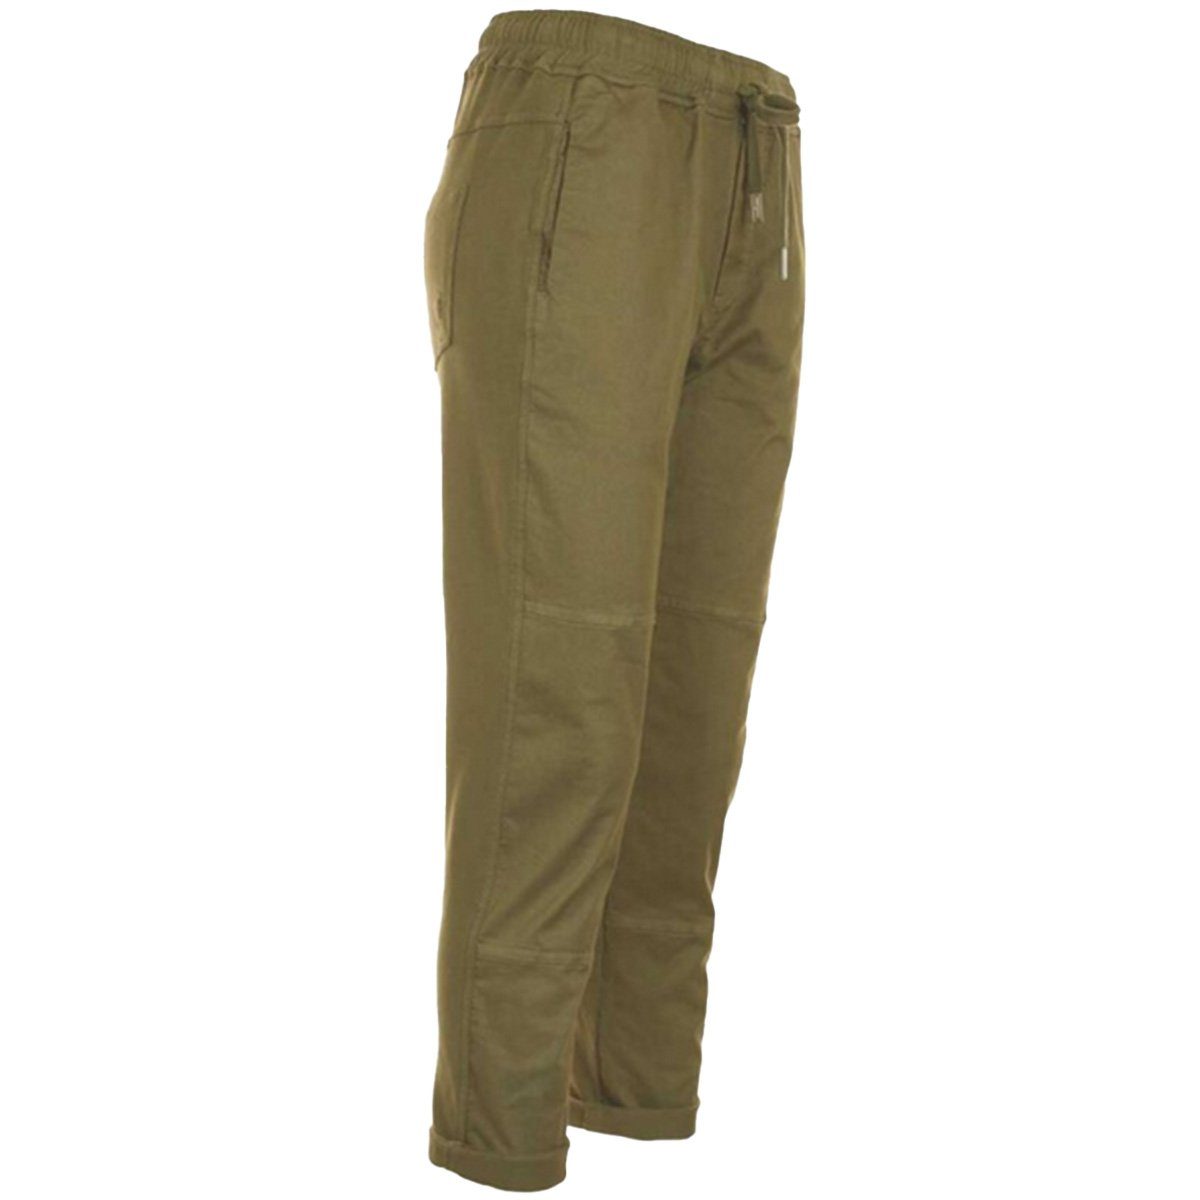 olive YOU2 FUNKY Jogger Pants stone-clover new STAFF